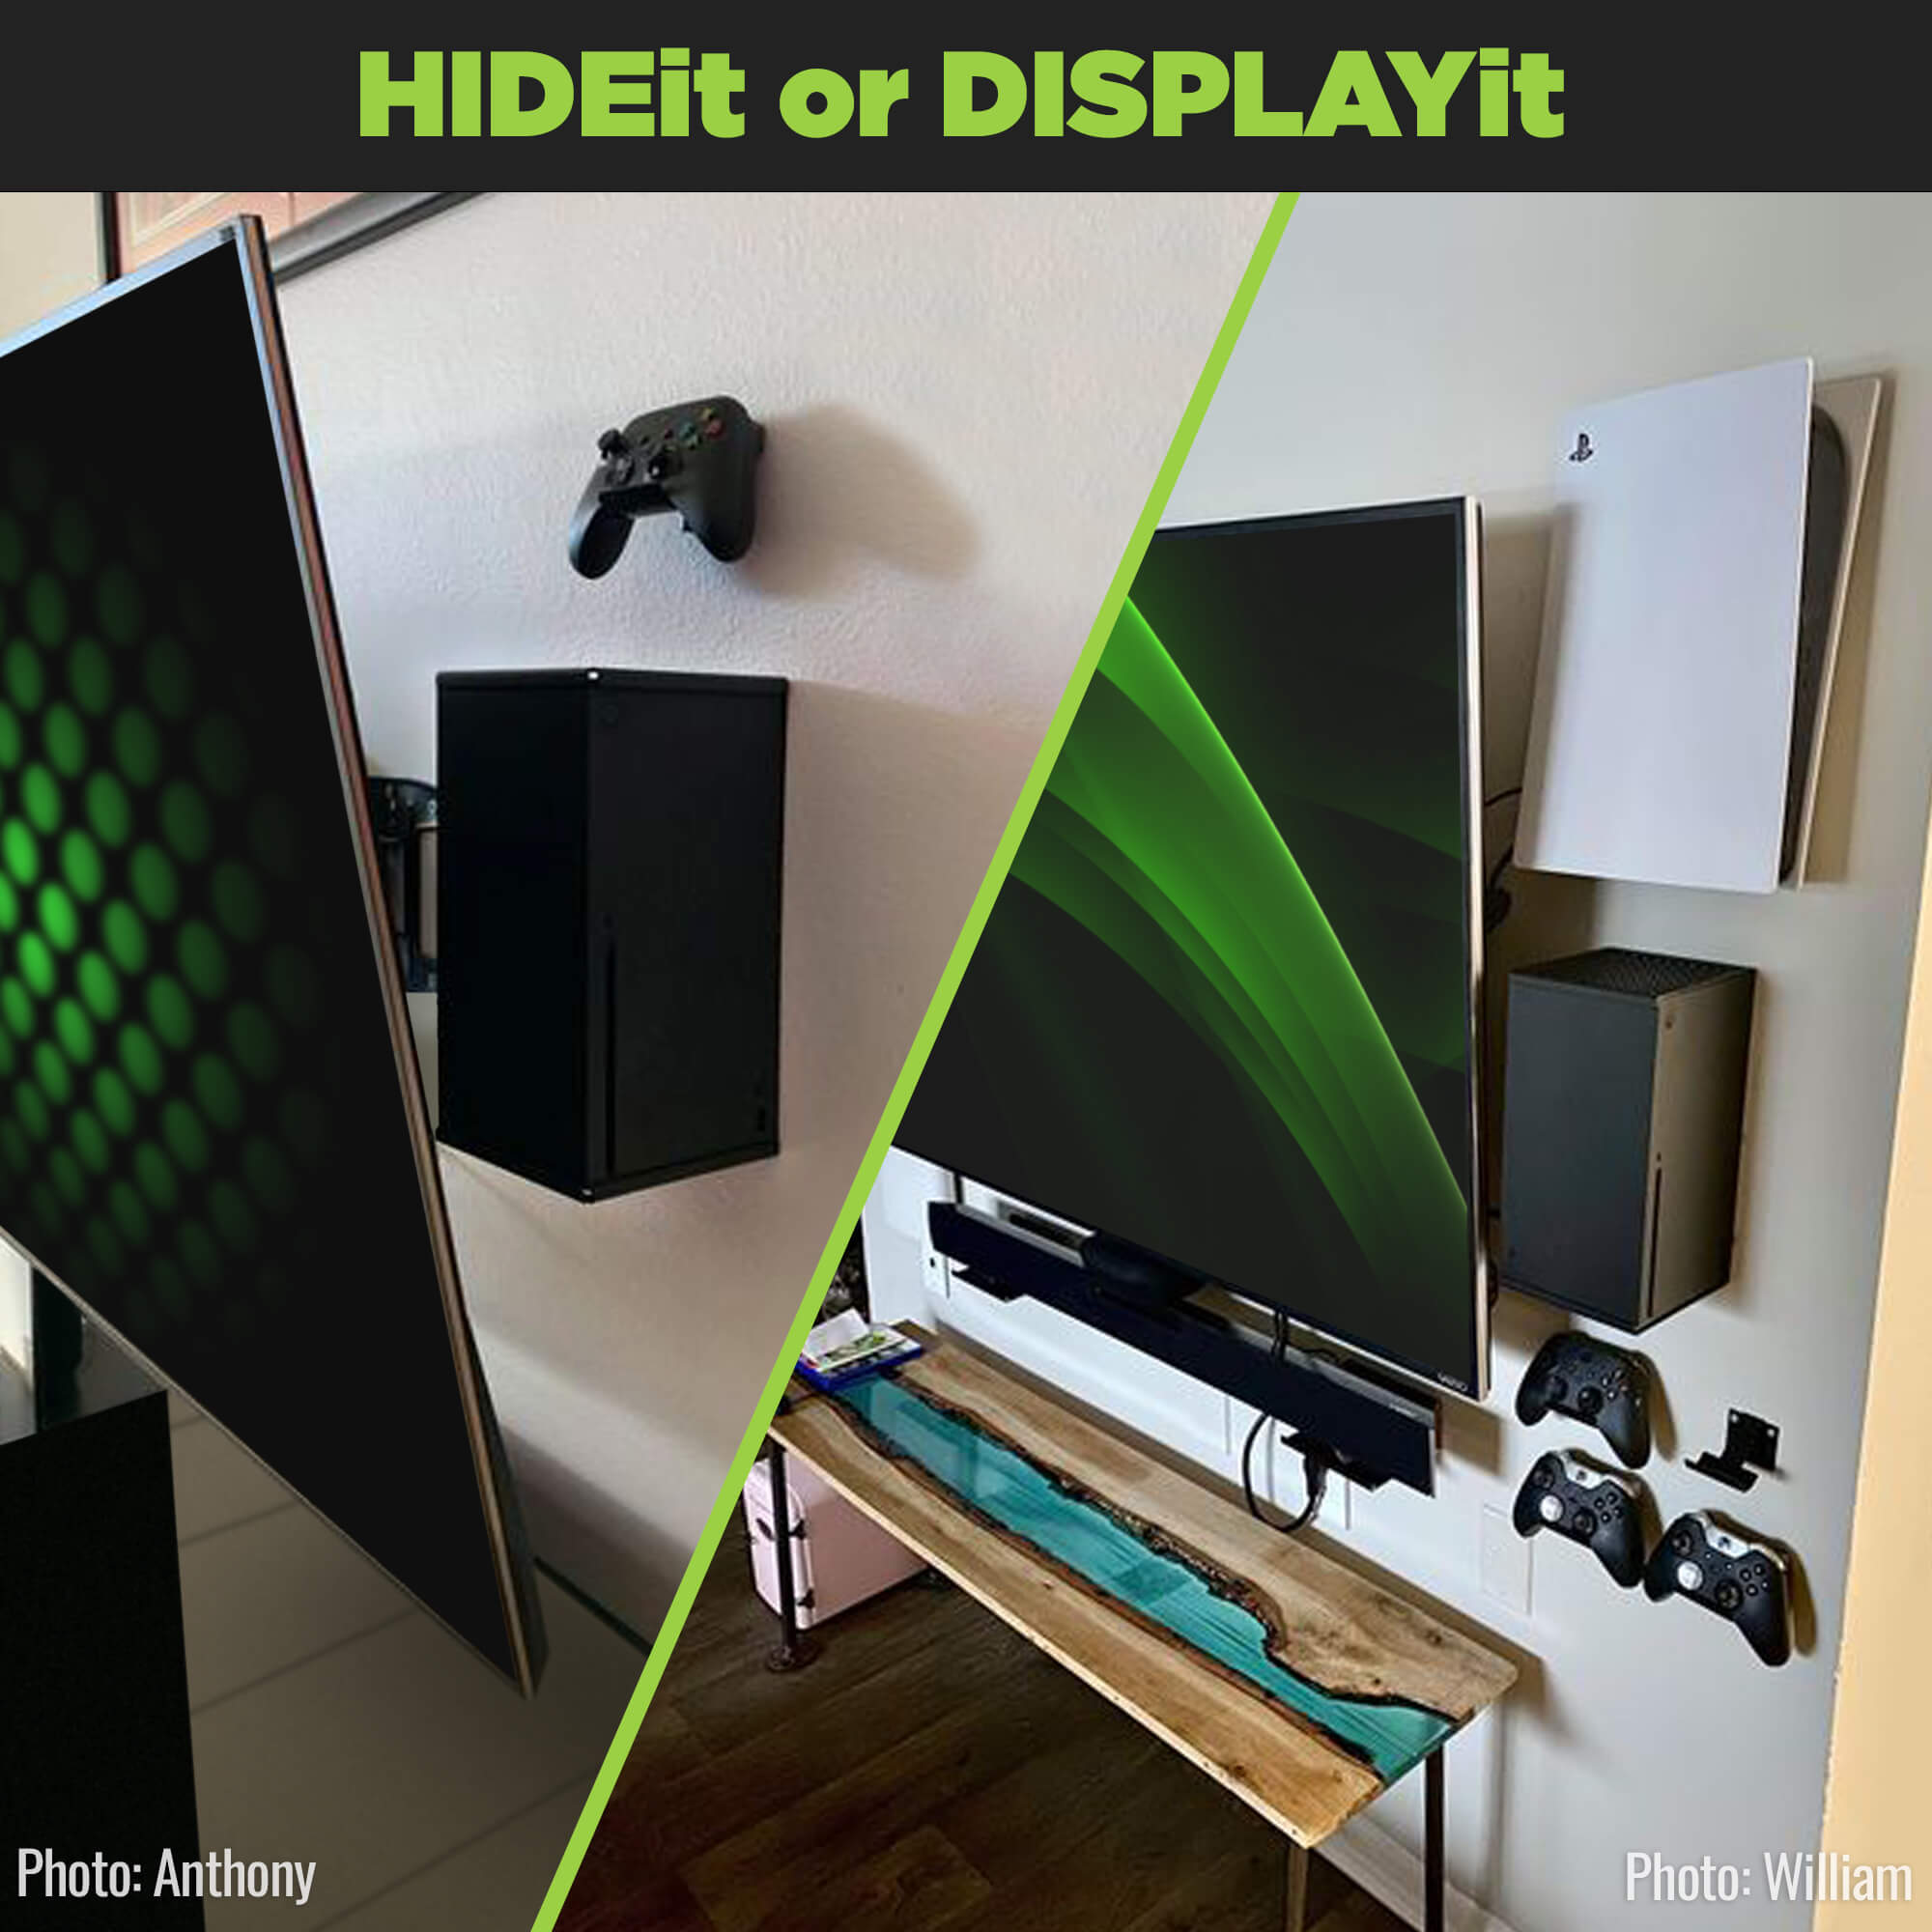 Xbox Series X mounted on the wall hidden behind a wall-mounted TV or displayed next to a TV. Shown with new Xbox controller and wall mounted PS5 console